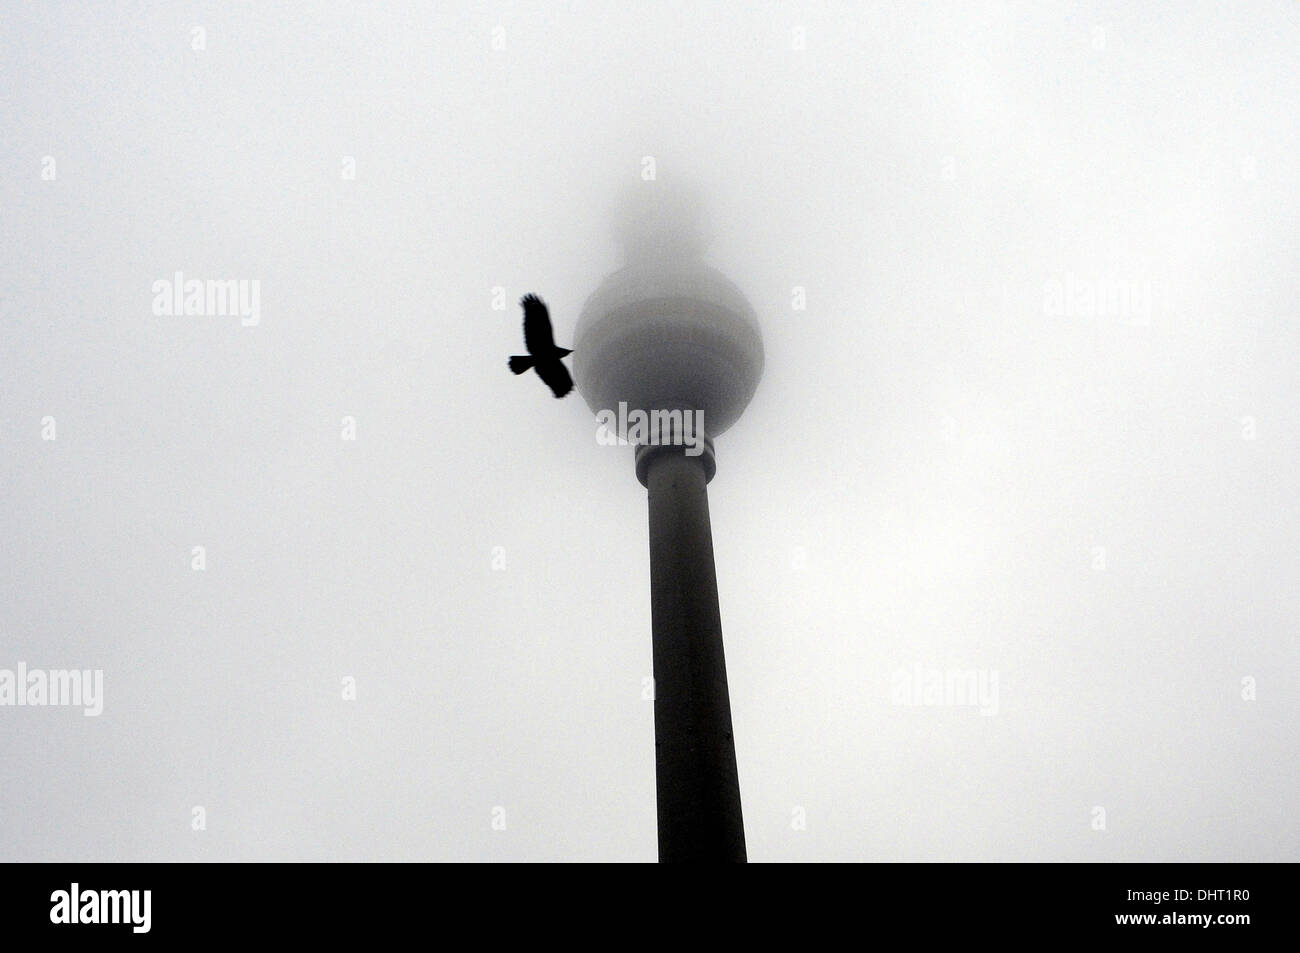 A bird flying next to the TV tower in Berlin, Germany Stock Photo